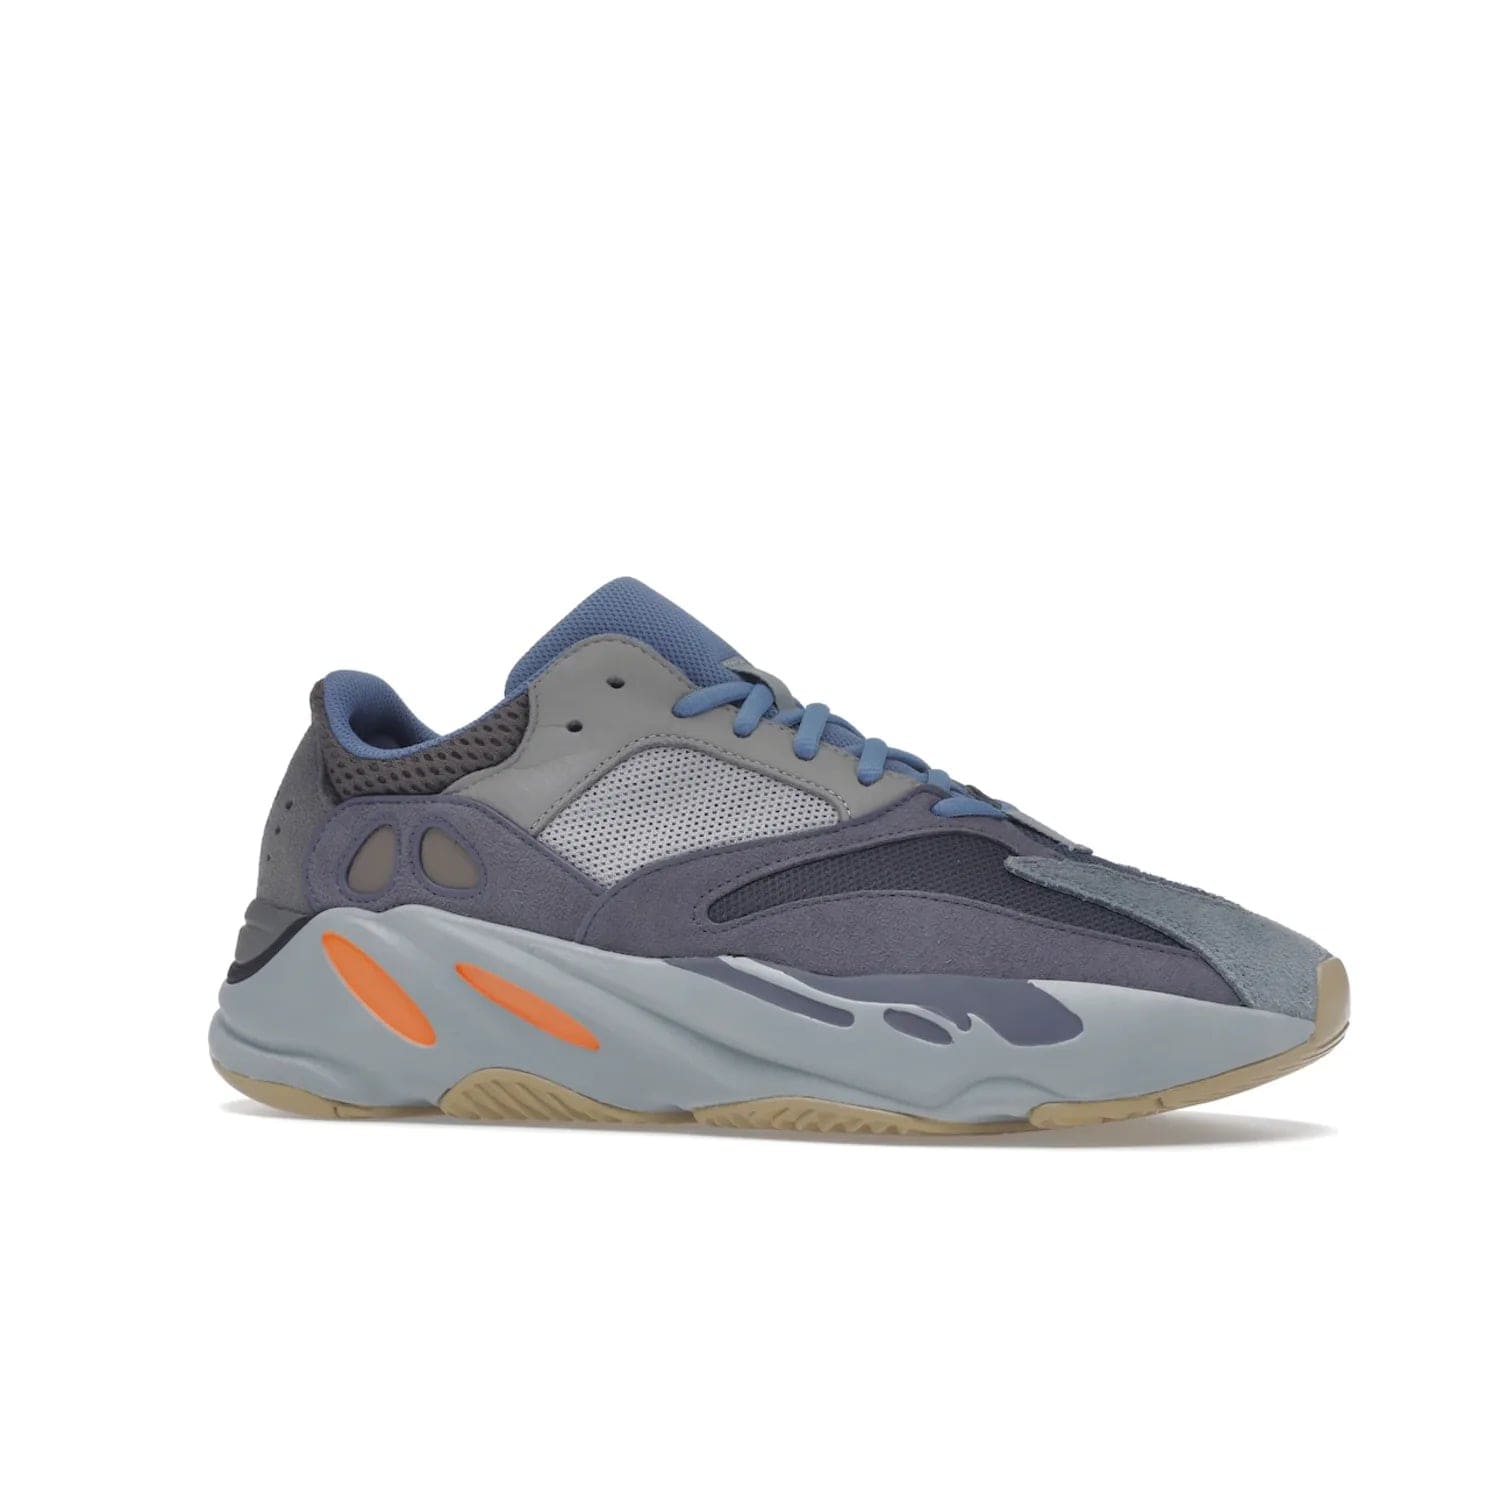 adidas Yeezy Boost 700 Carbon Blue - Image 3 - Only at www.BallersClubKickz.com - Style meets practicality with the adidas Yeezy Boost 700 Carbon Blue. Tonal grey and carbon blue mix of suede and mesh upper, grey midsole and gum outsole. Get yours today.